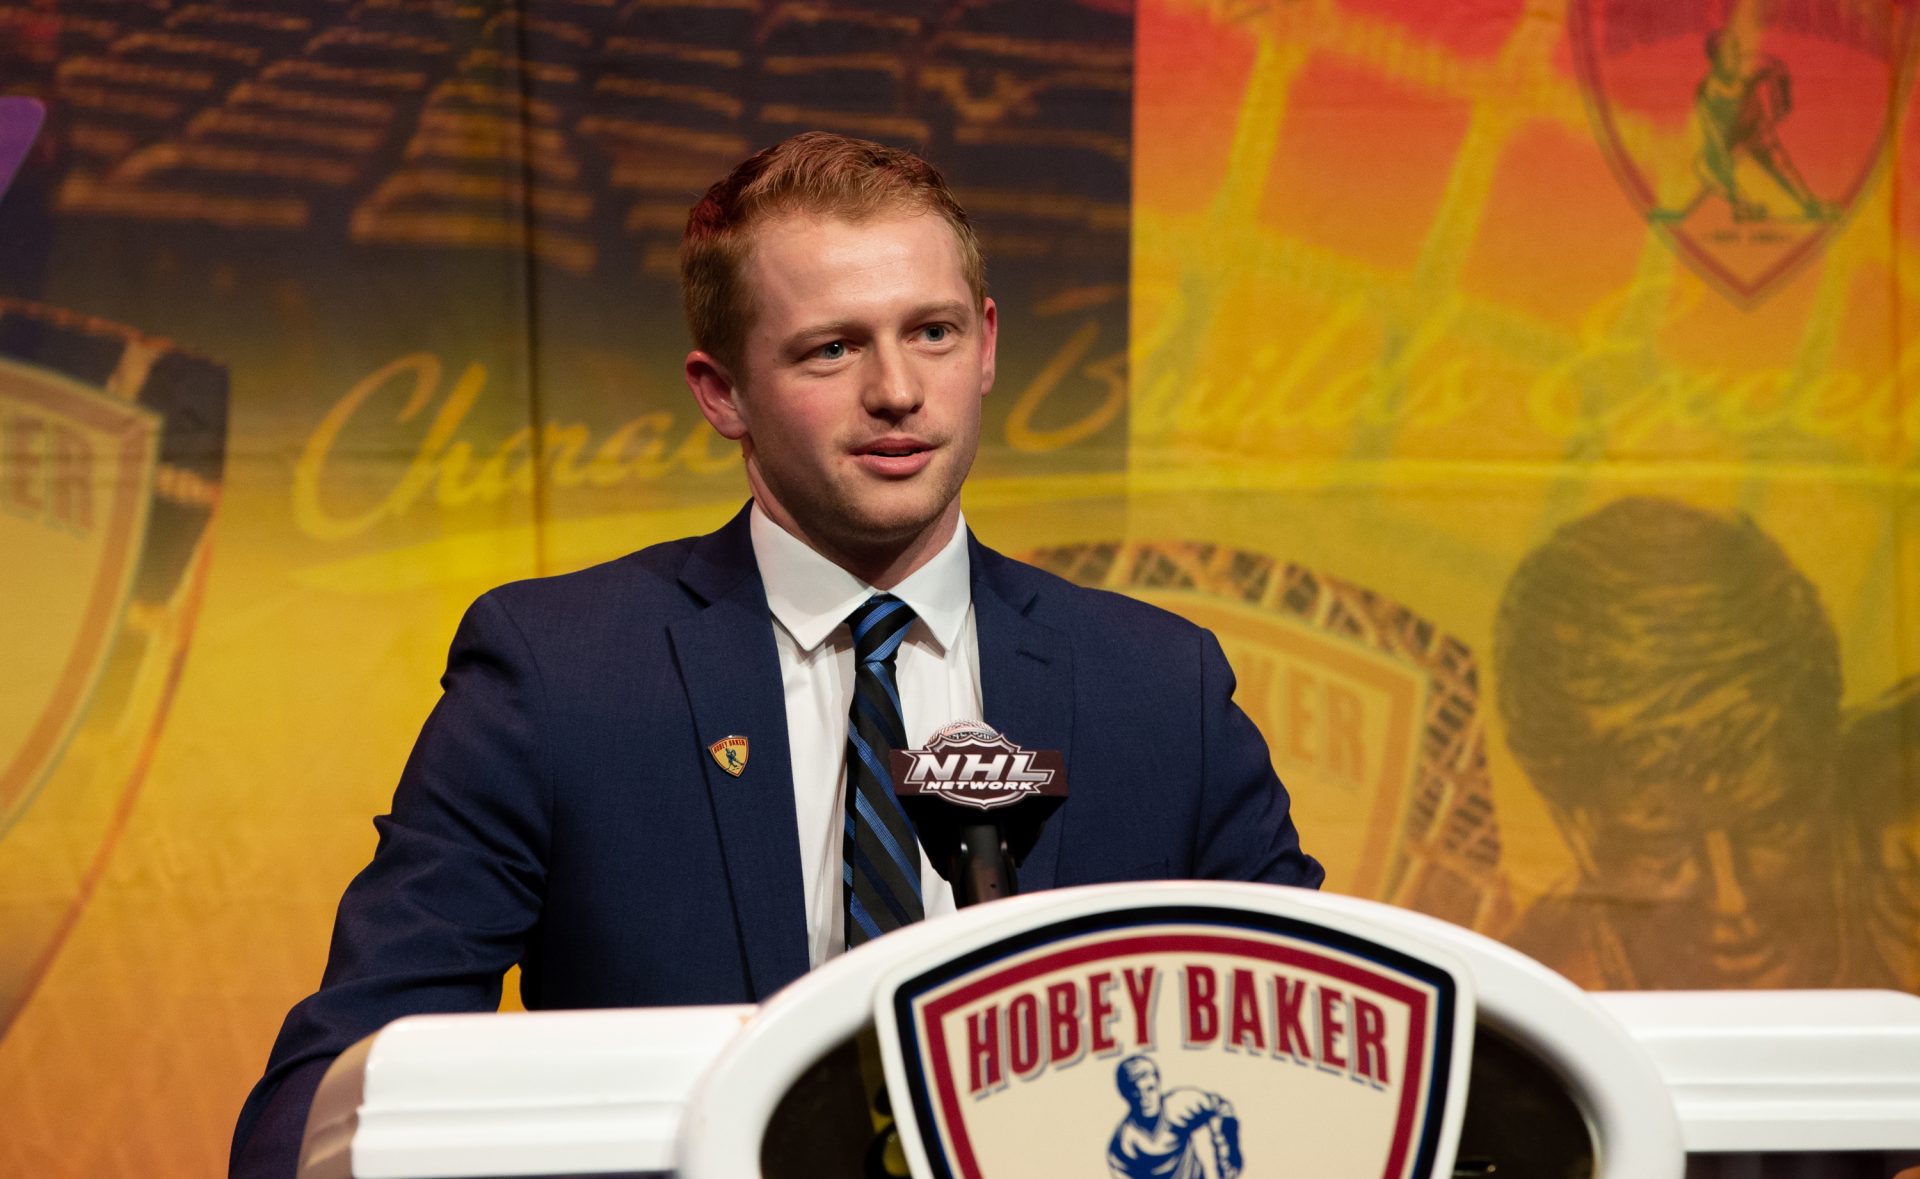 Hobey Baker foundation stands by choice of McKay as 2022 award winner